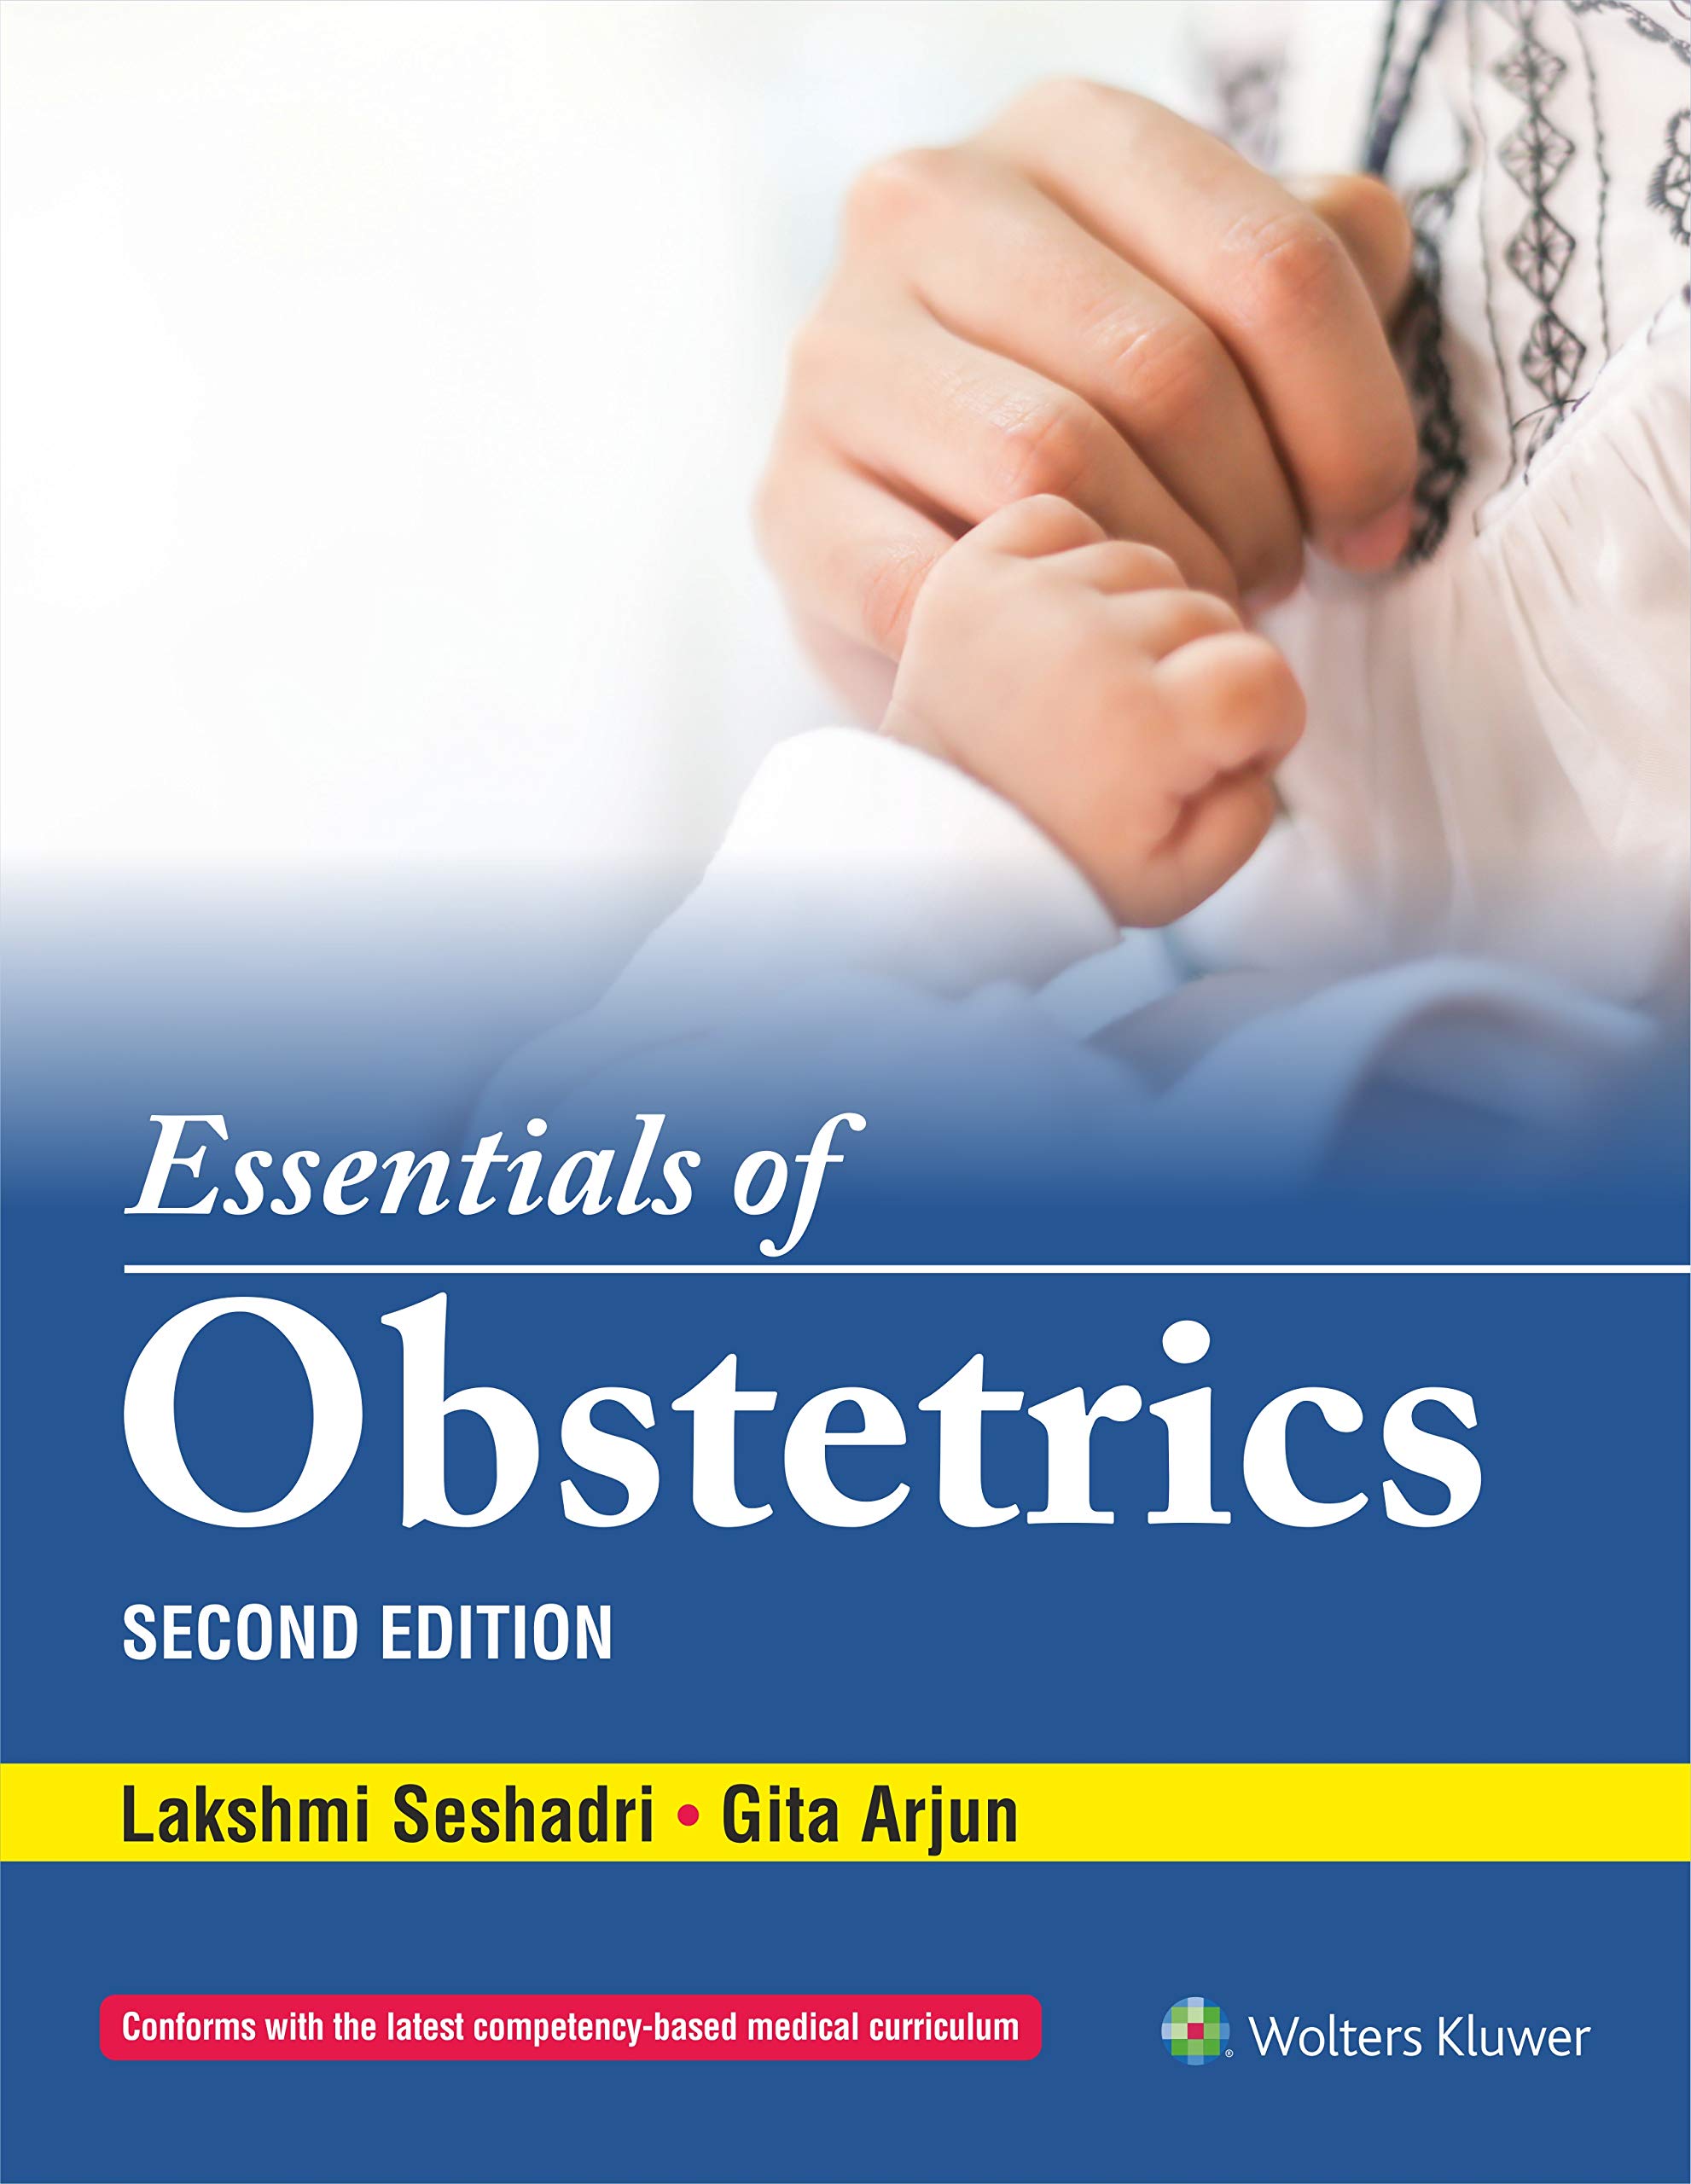 Essentials of Obstetrics 2nd Edition 2020